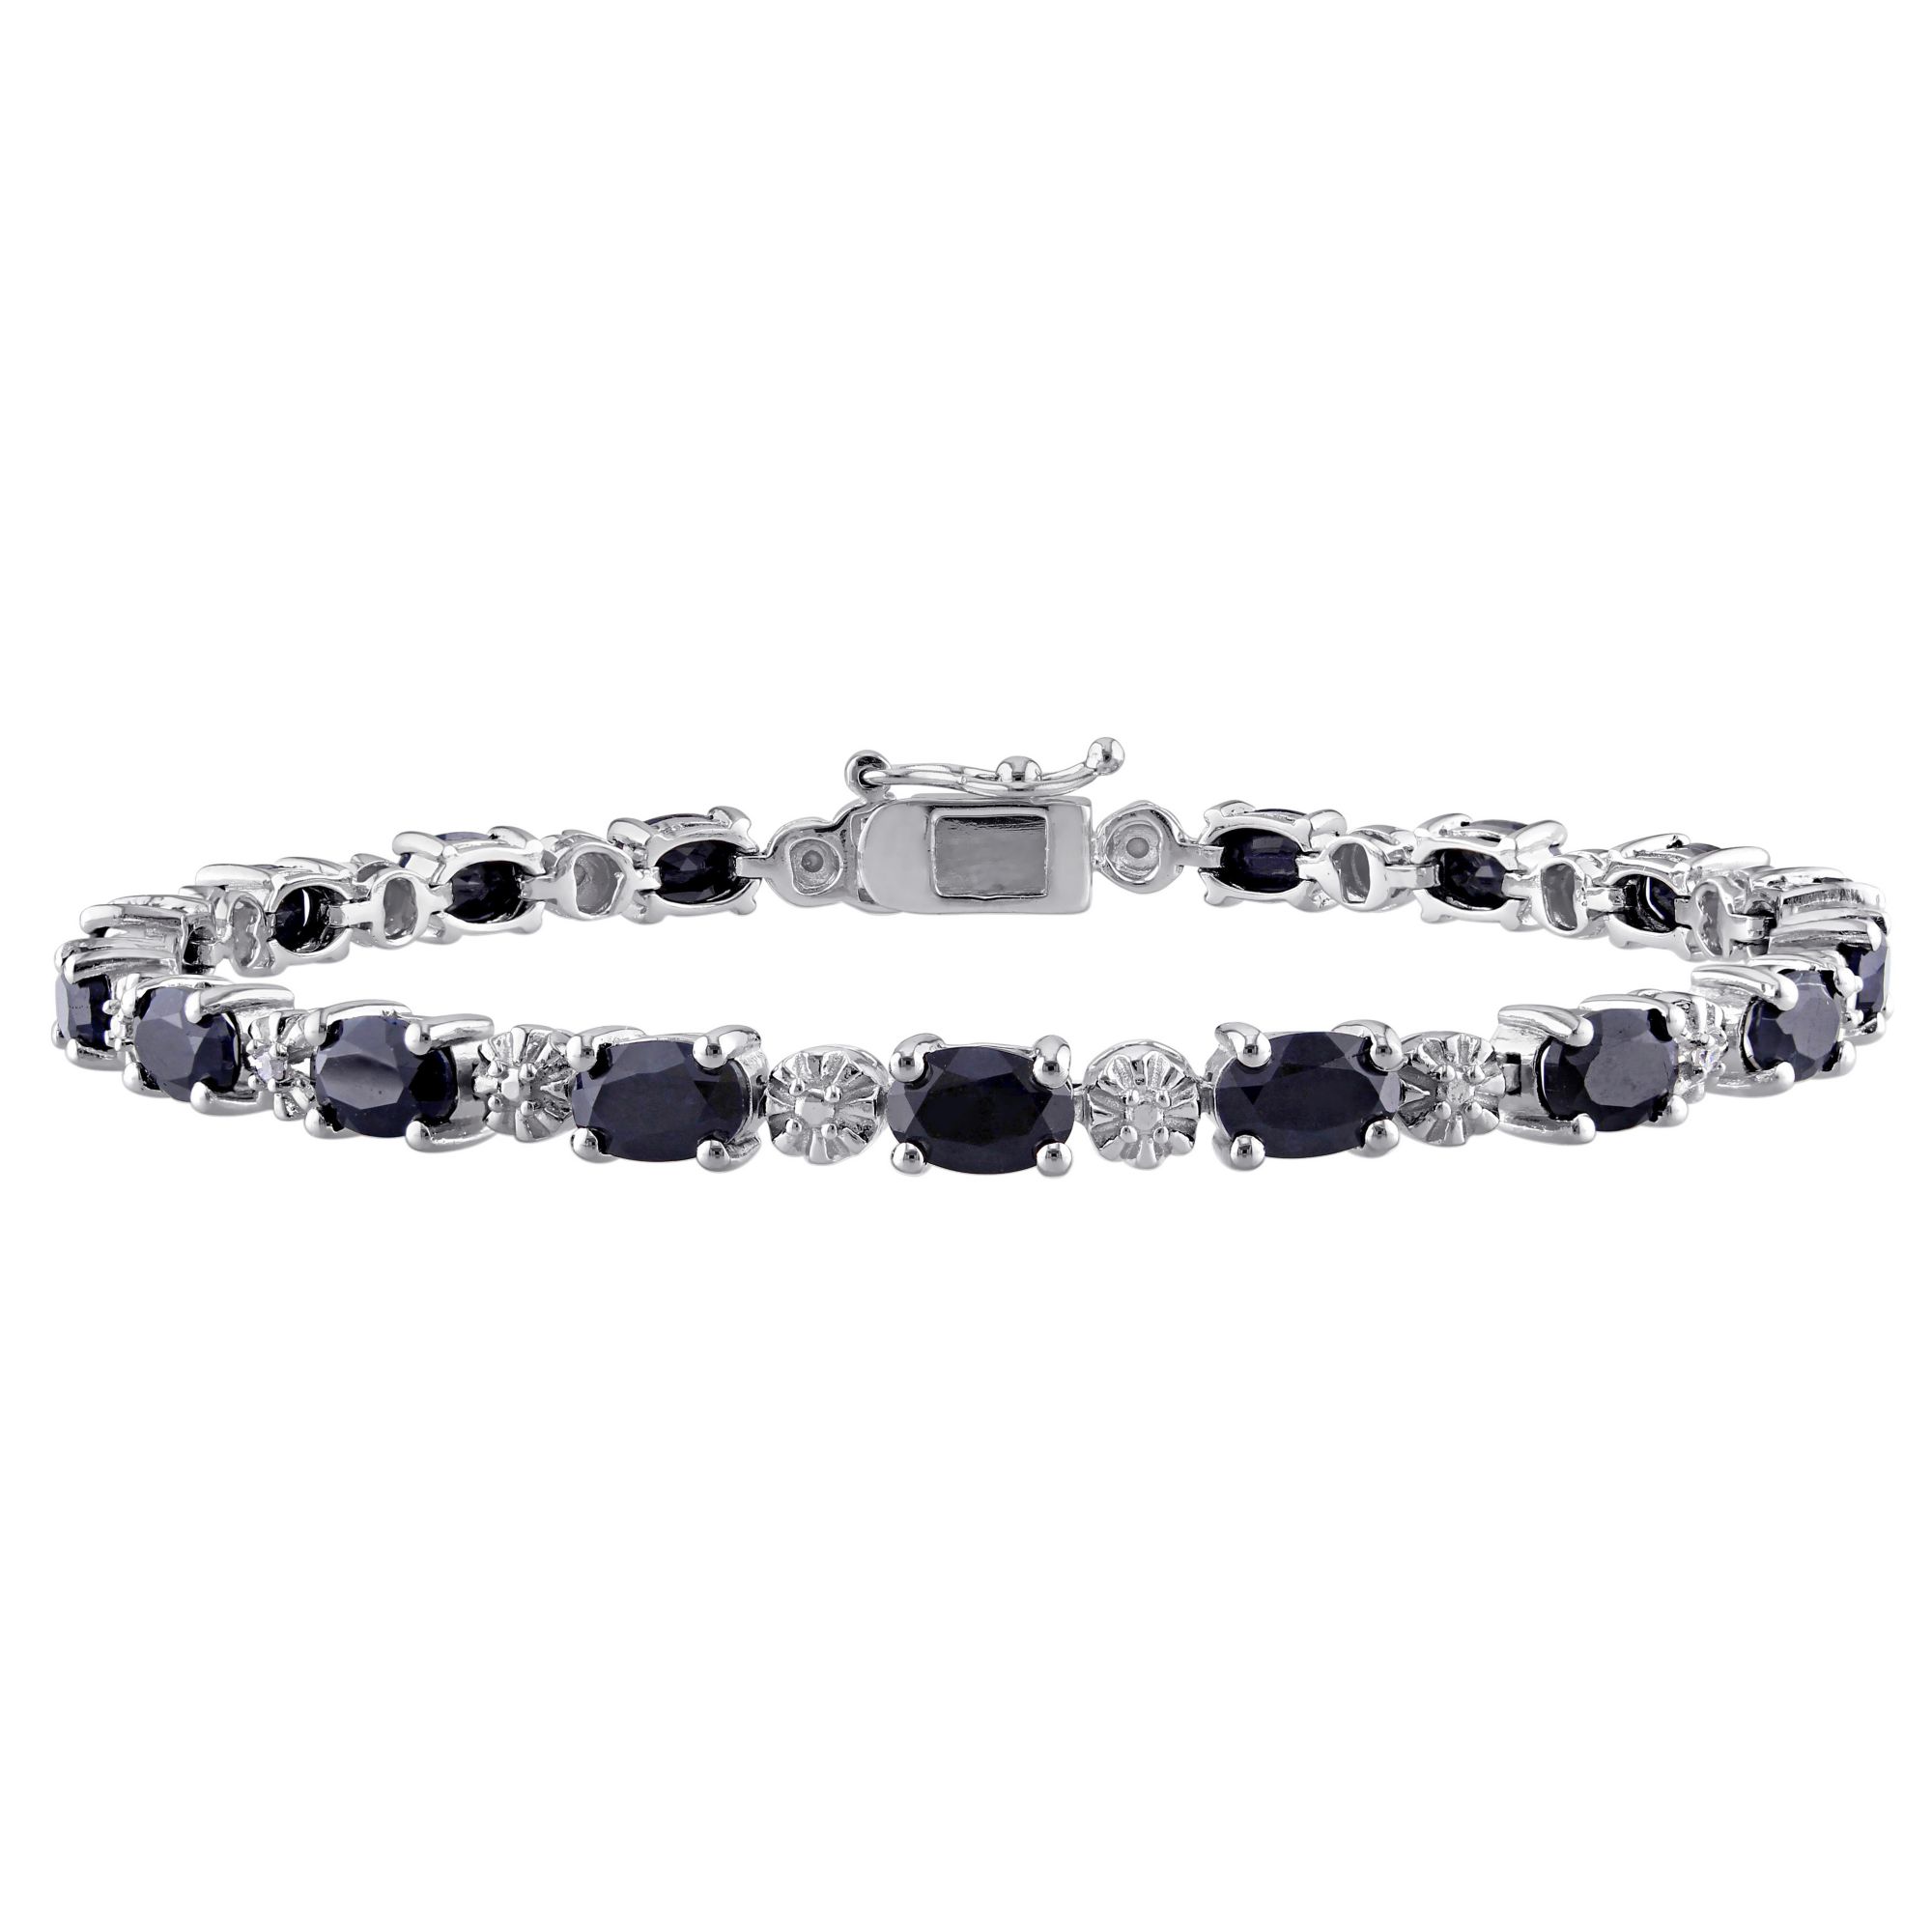 11.16 ct. t.g.w. Black Sapphire and Diamond Accent Bracelet in Sterling Silver